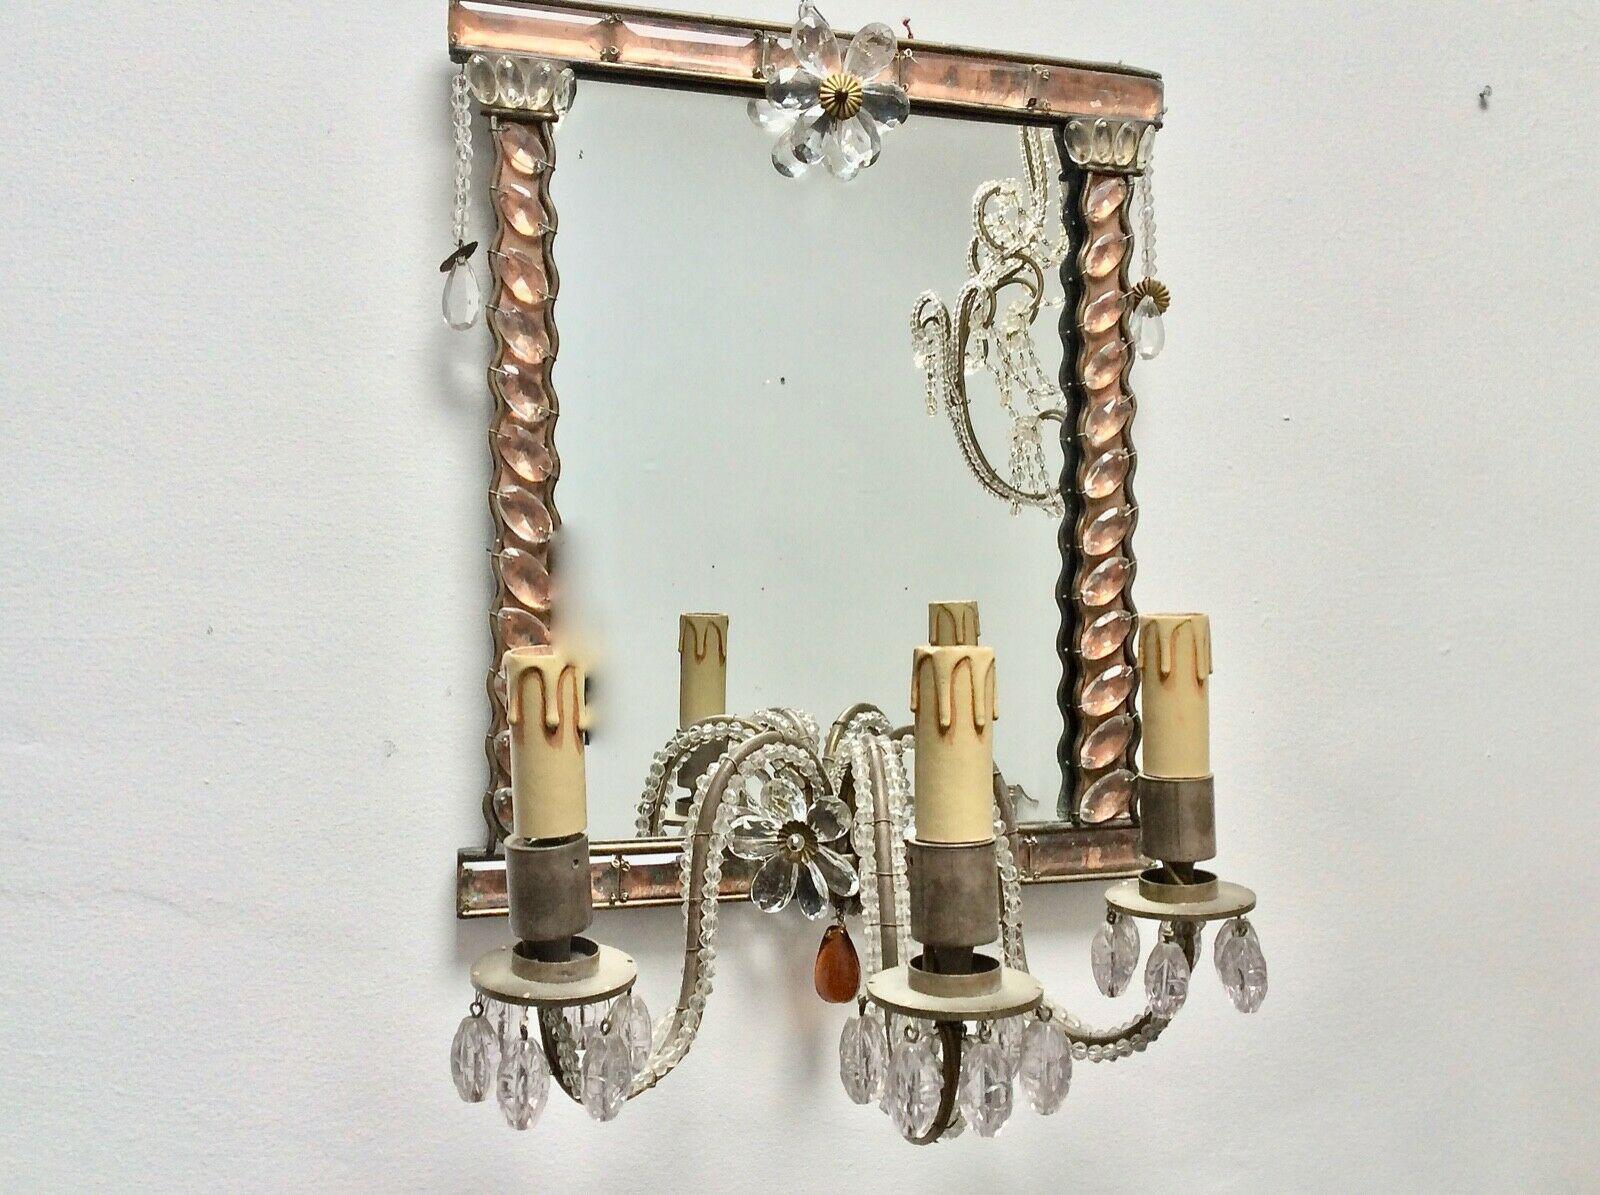 Rare 1920s French Art Deco Crystal Maison Bagues Wall Mirror Sconce / Wall Lamp In Good Condition For Sale In Opa Locka, FL